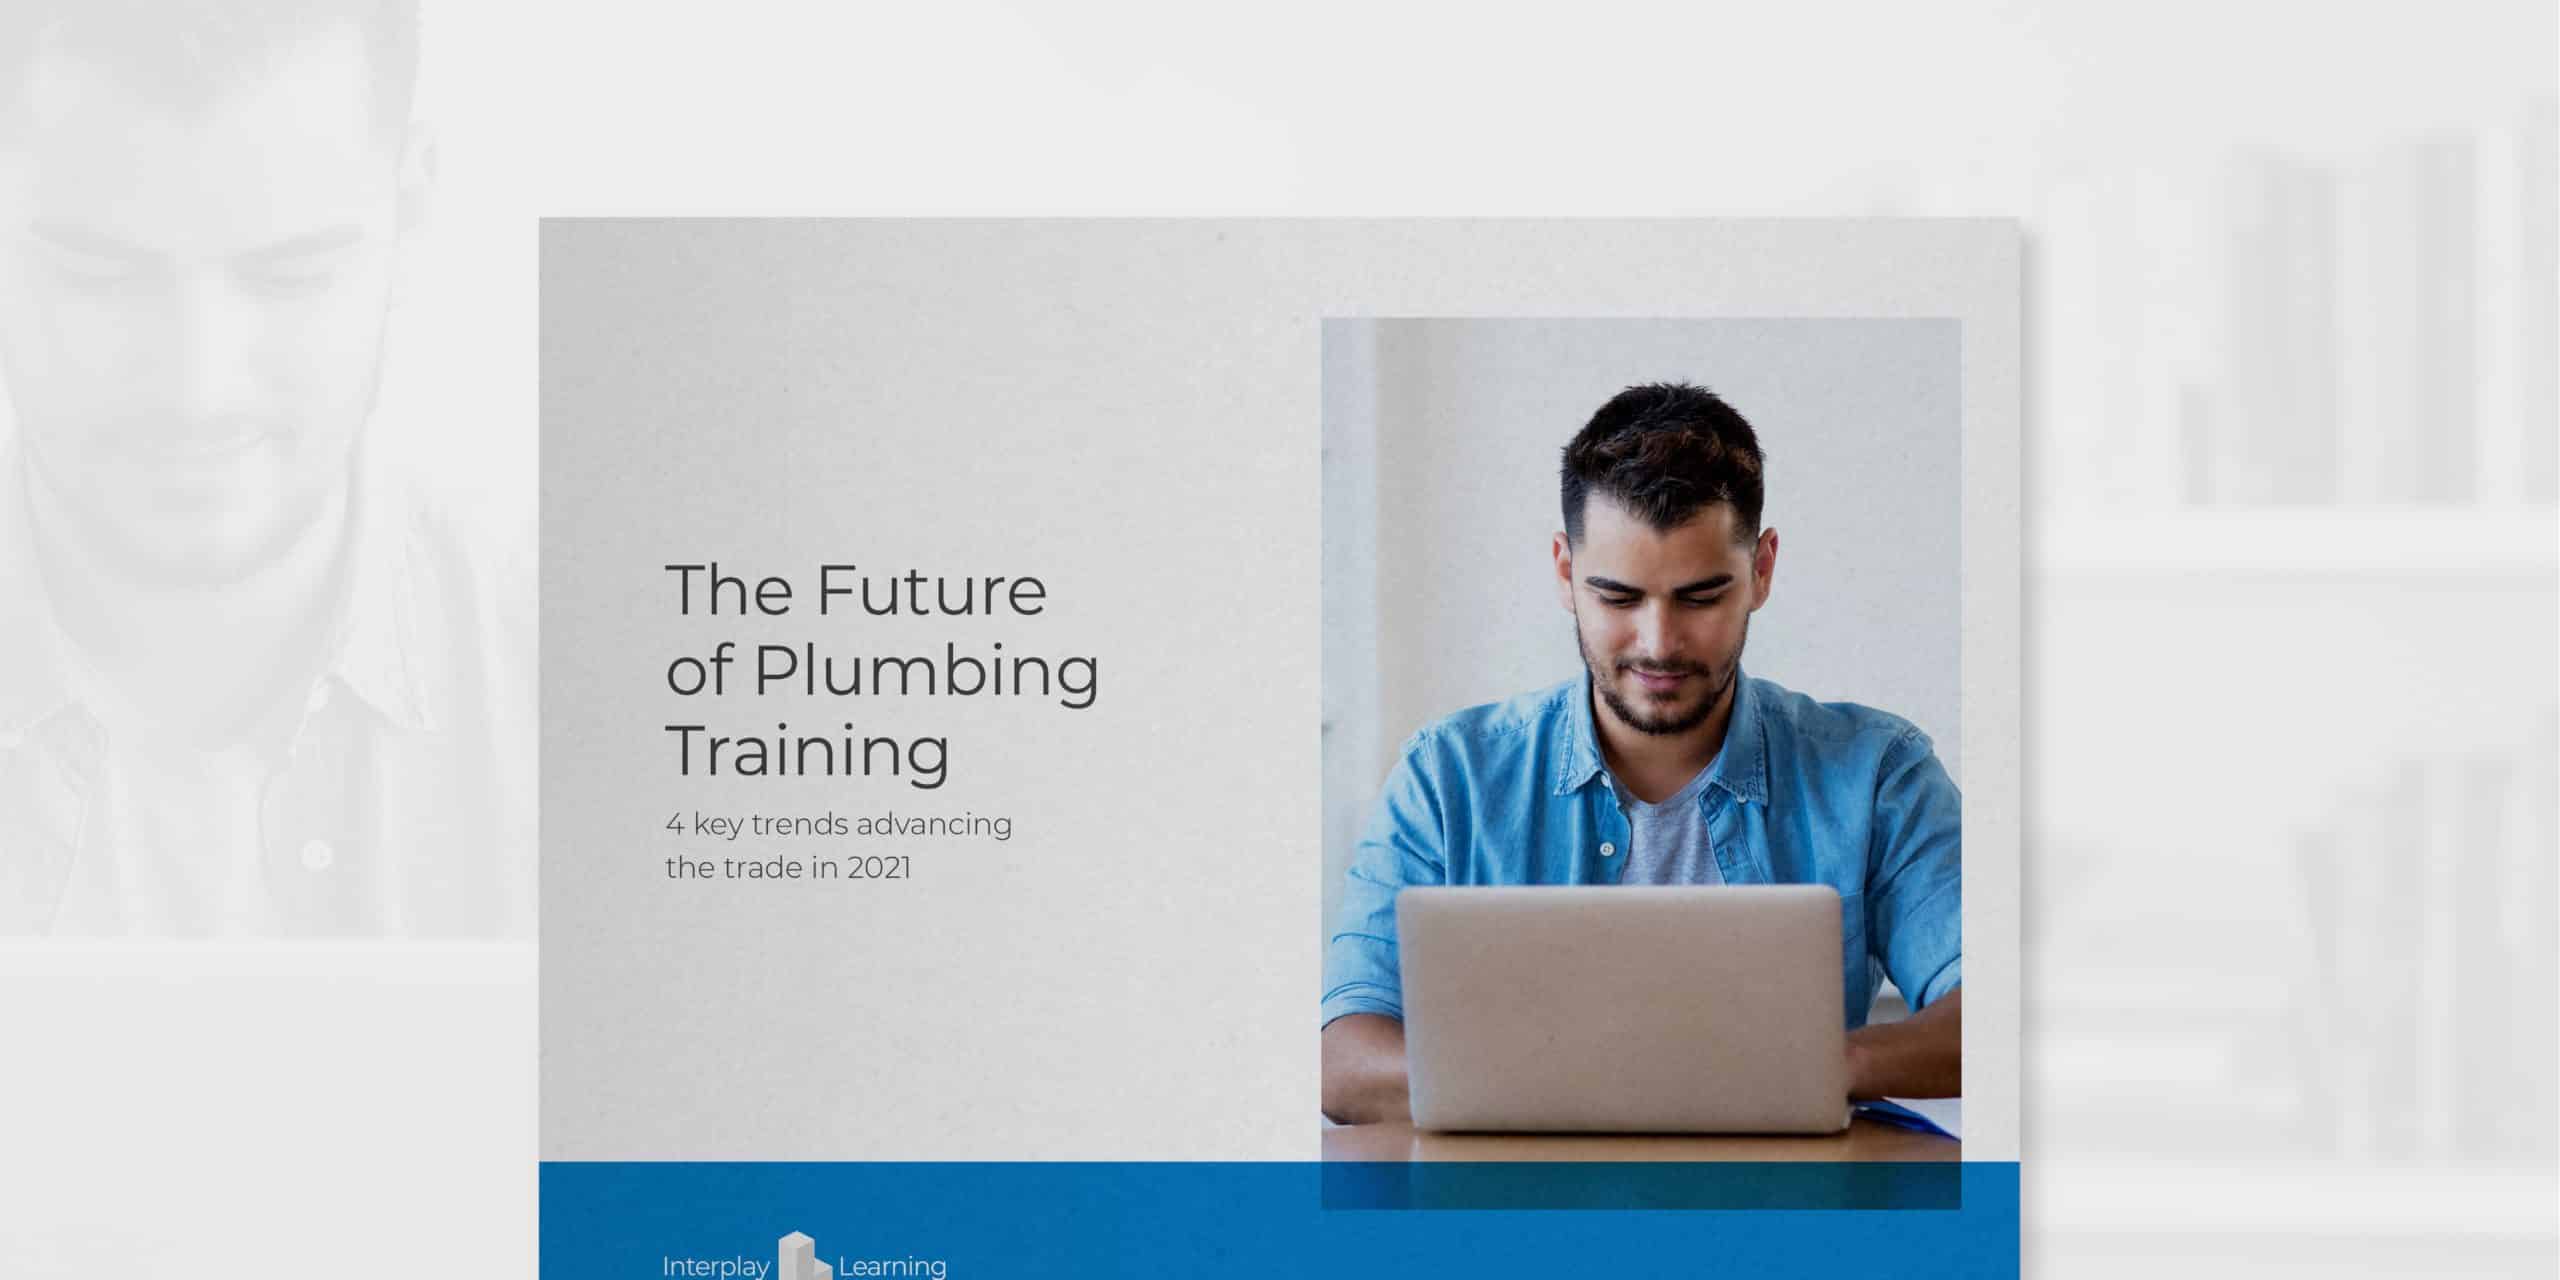 Promo banner disucssing the future of plumbing trainig showing a man sitting at a laptop